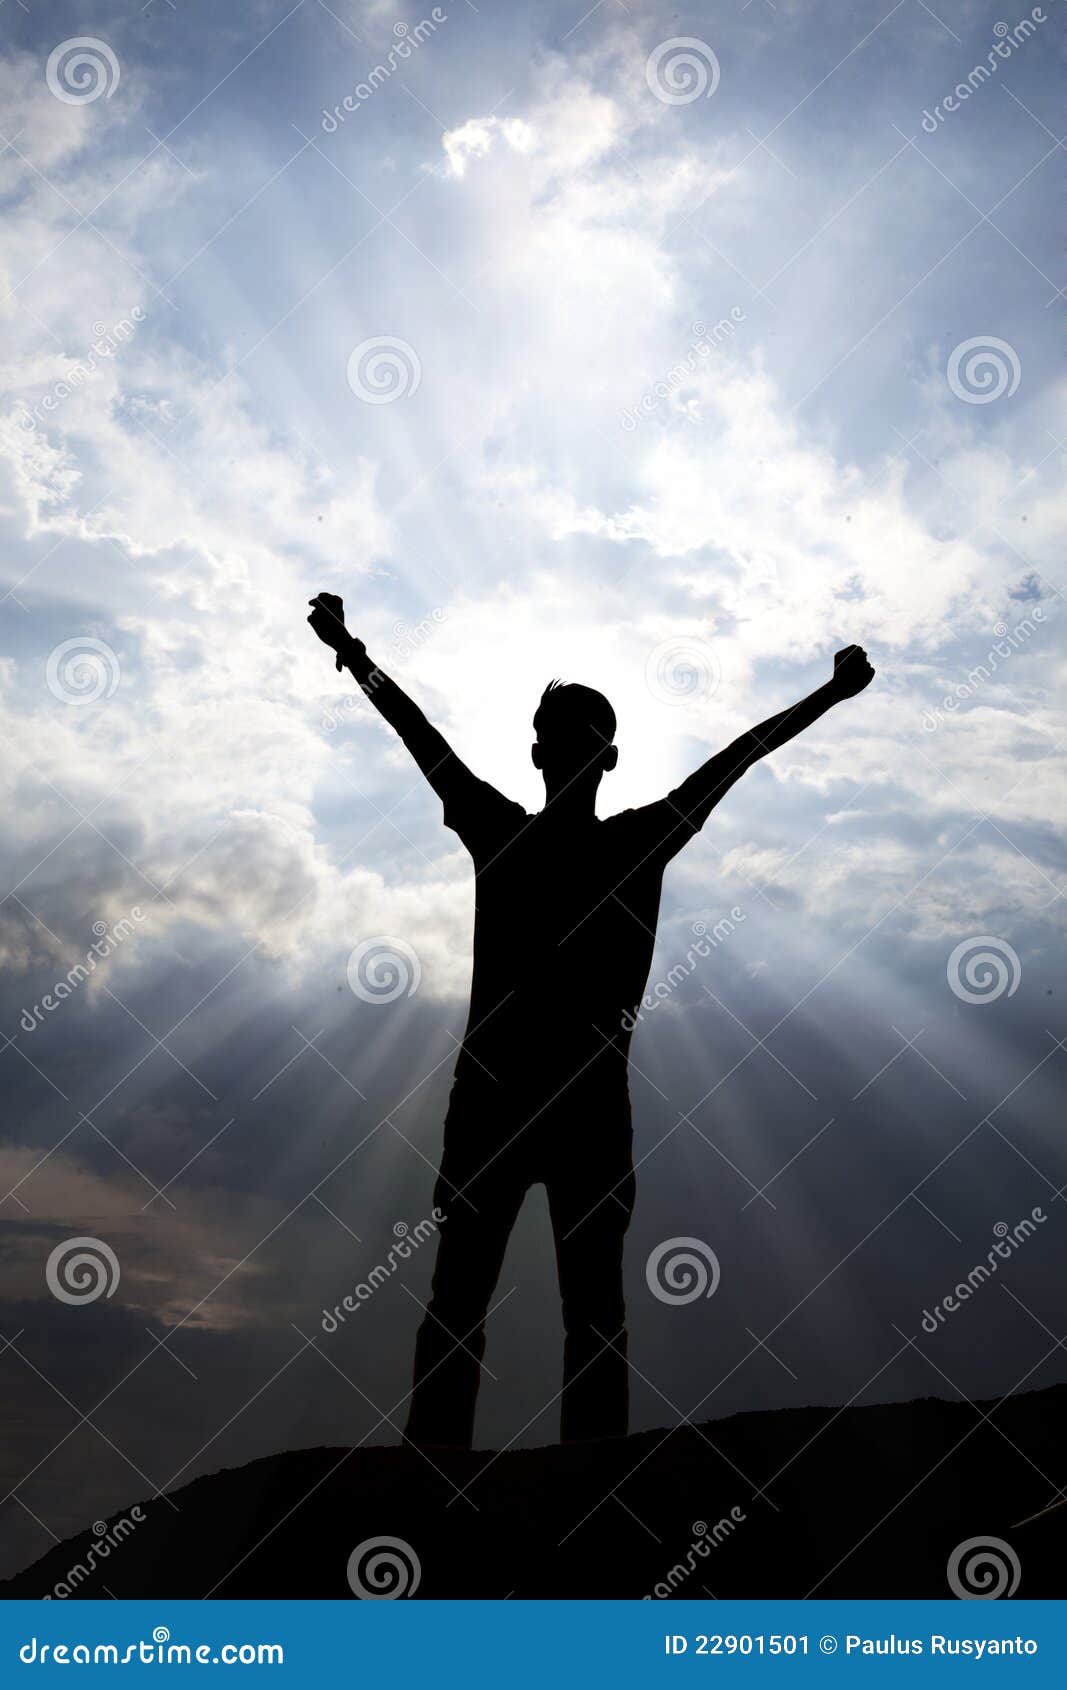 Worship. Silhouette of a man with arms stretched out to the sky